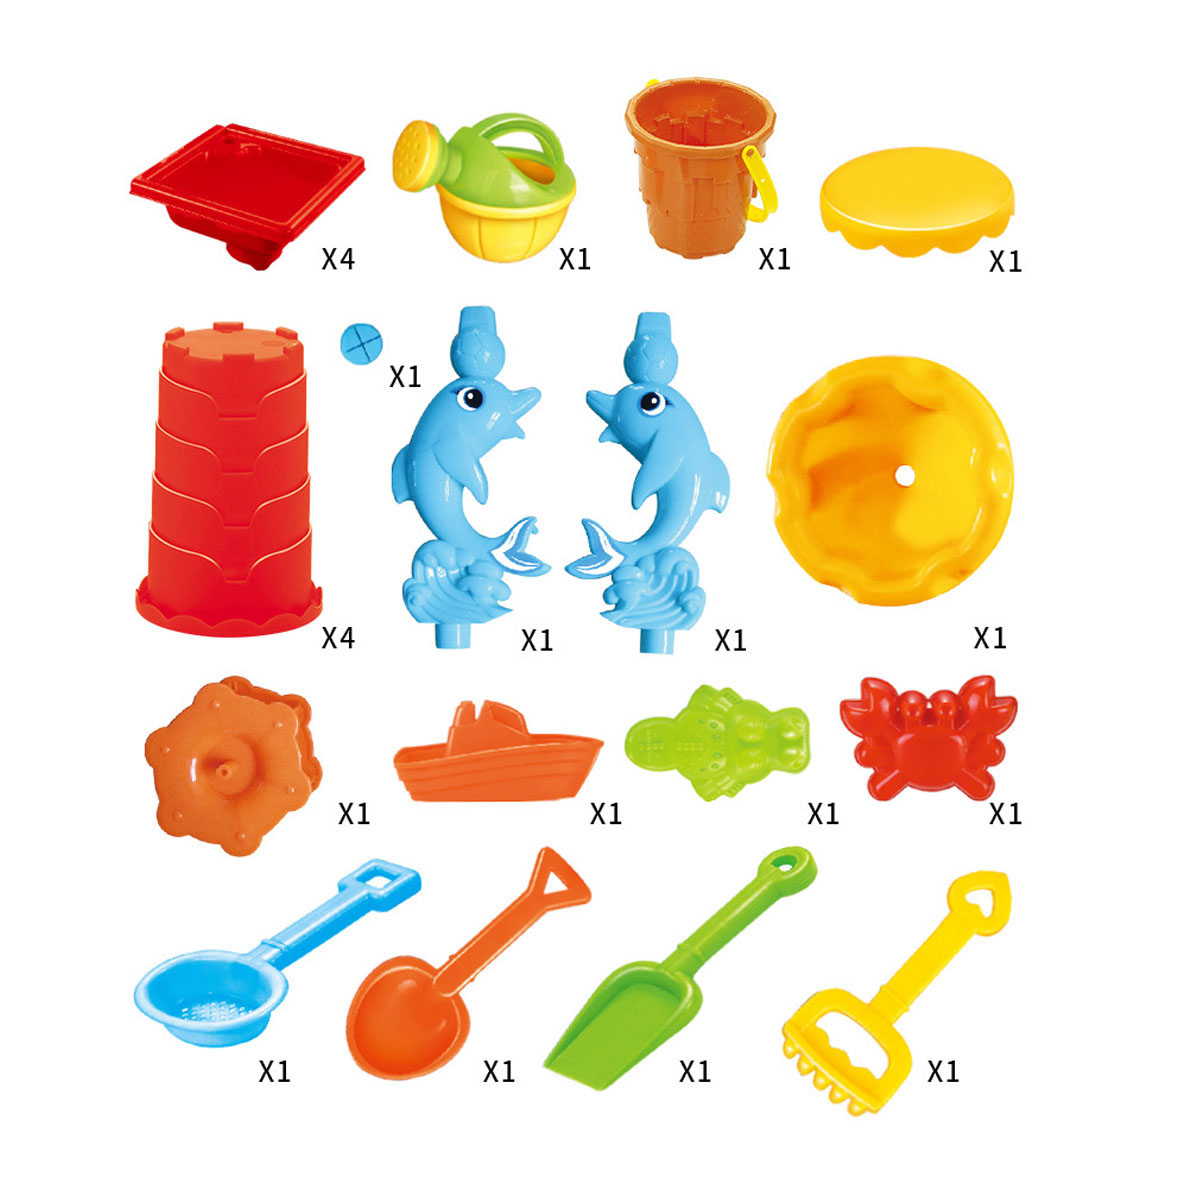 2-IN-1-Multi-style-Summer-Beach-Sand-Kids-Play-Water-Digging-Sandglass-Play-Sand-Tool-Set-Toys-for-K-1699507-8